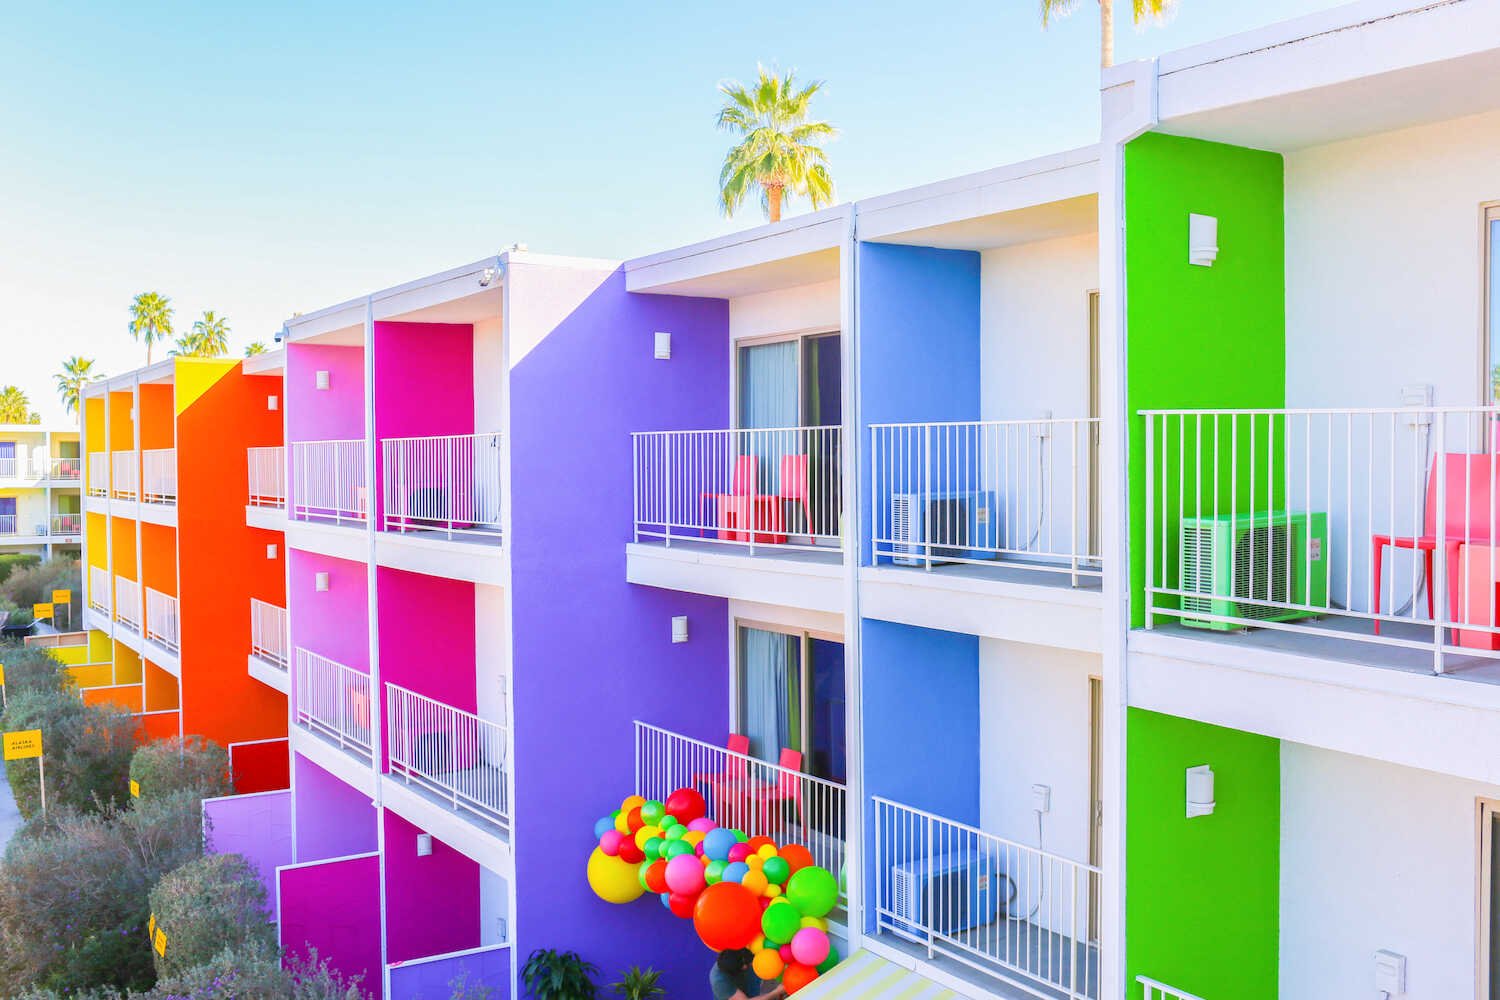 Top 10 Epic 30th Birthday Travel Destinations - The colorful rainbow Saguaro Hotel in Palm Springs.